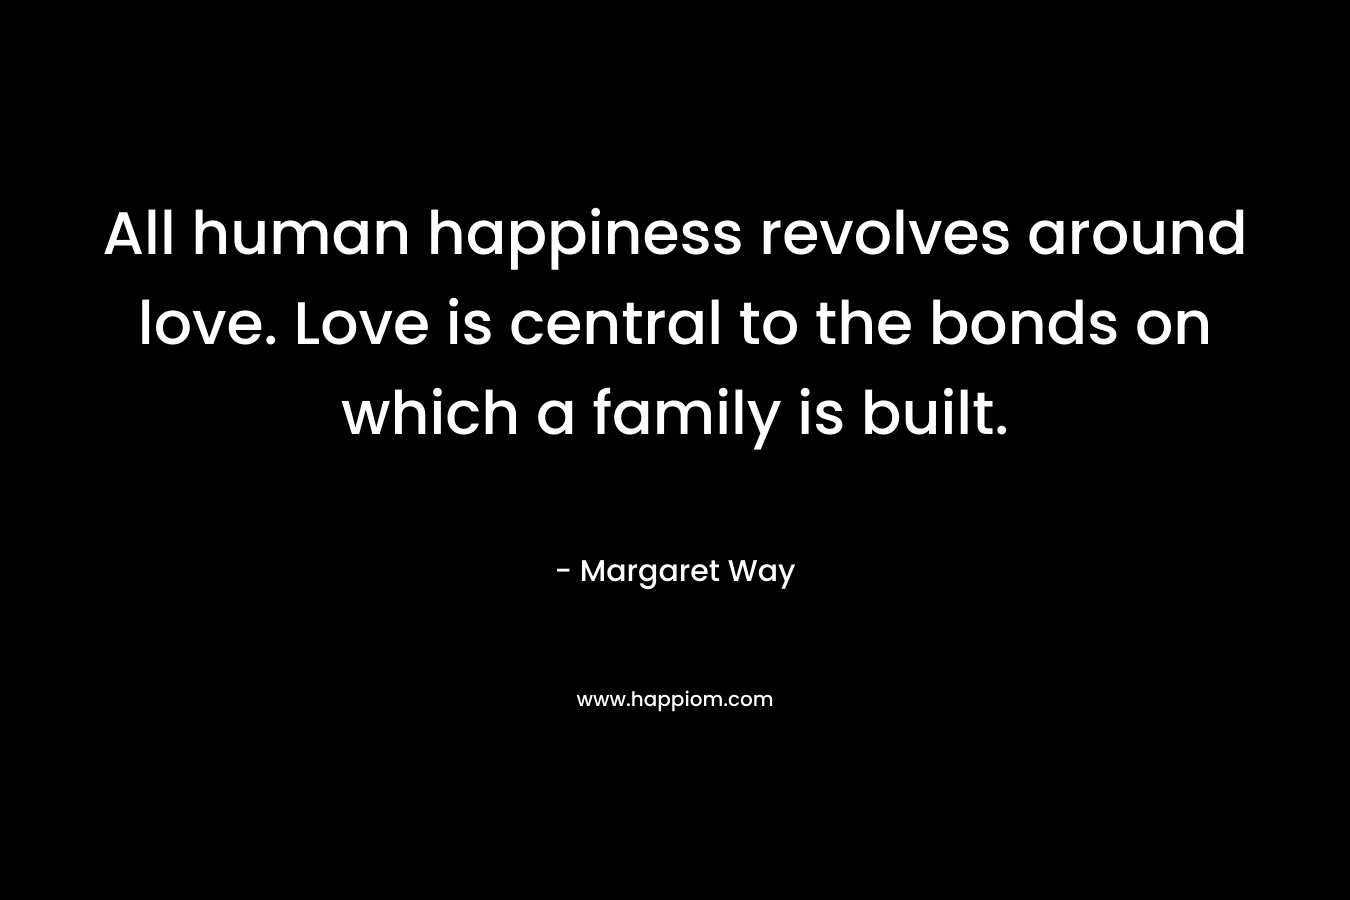 All human happiness revolves around love. Love is central to the bonds on which a family is built. – Margaret Way